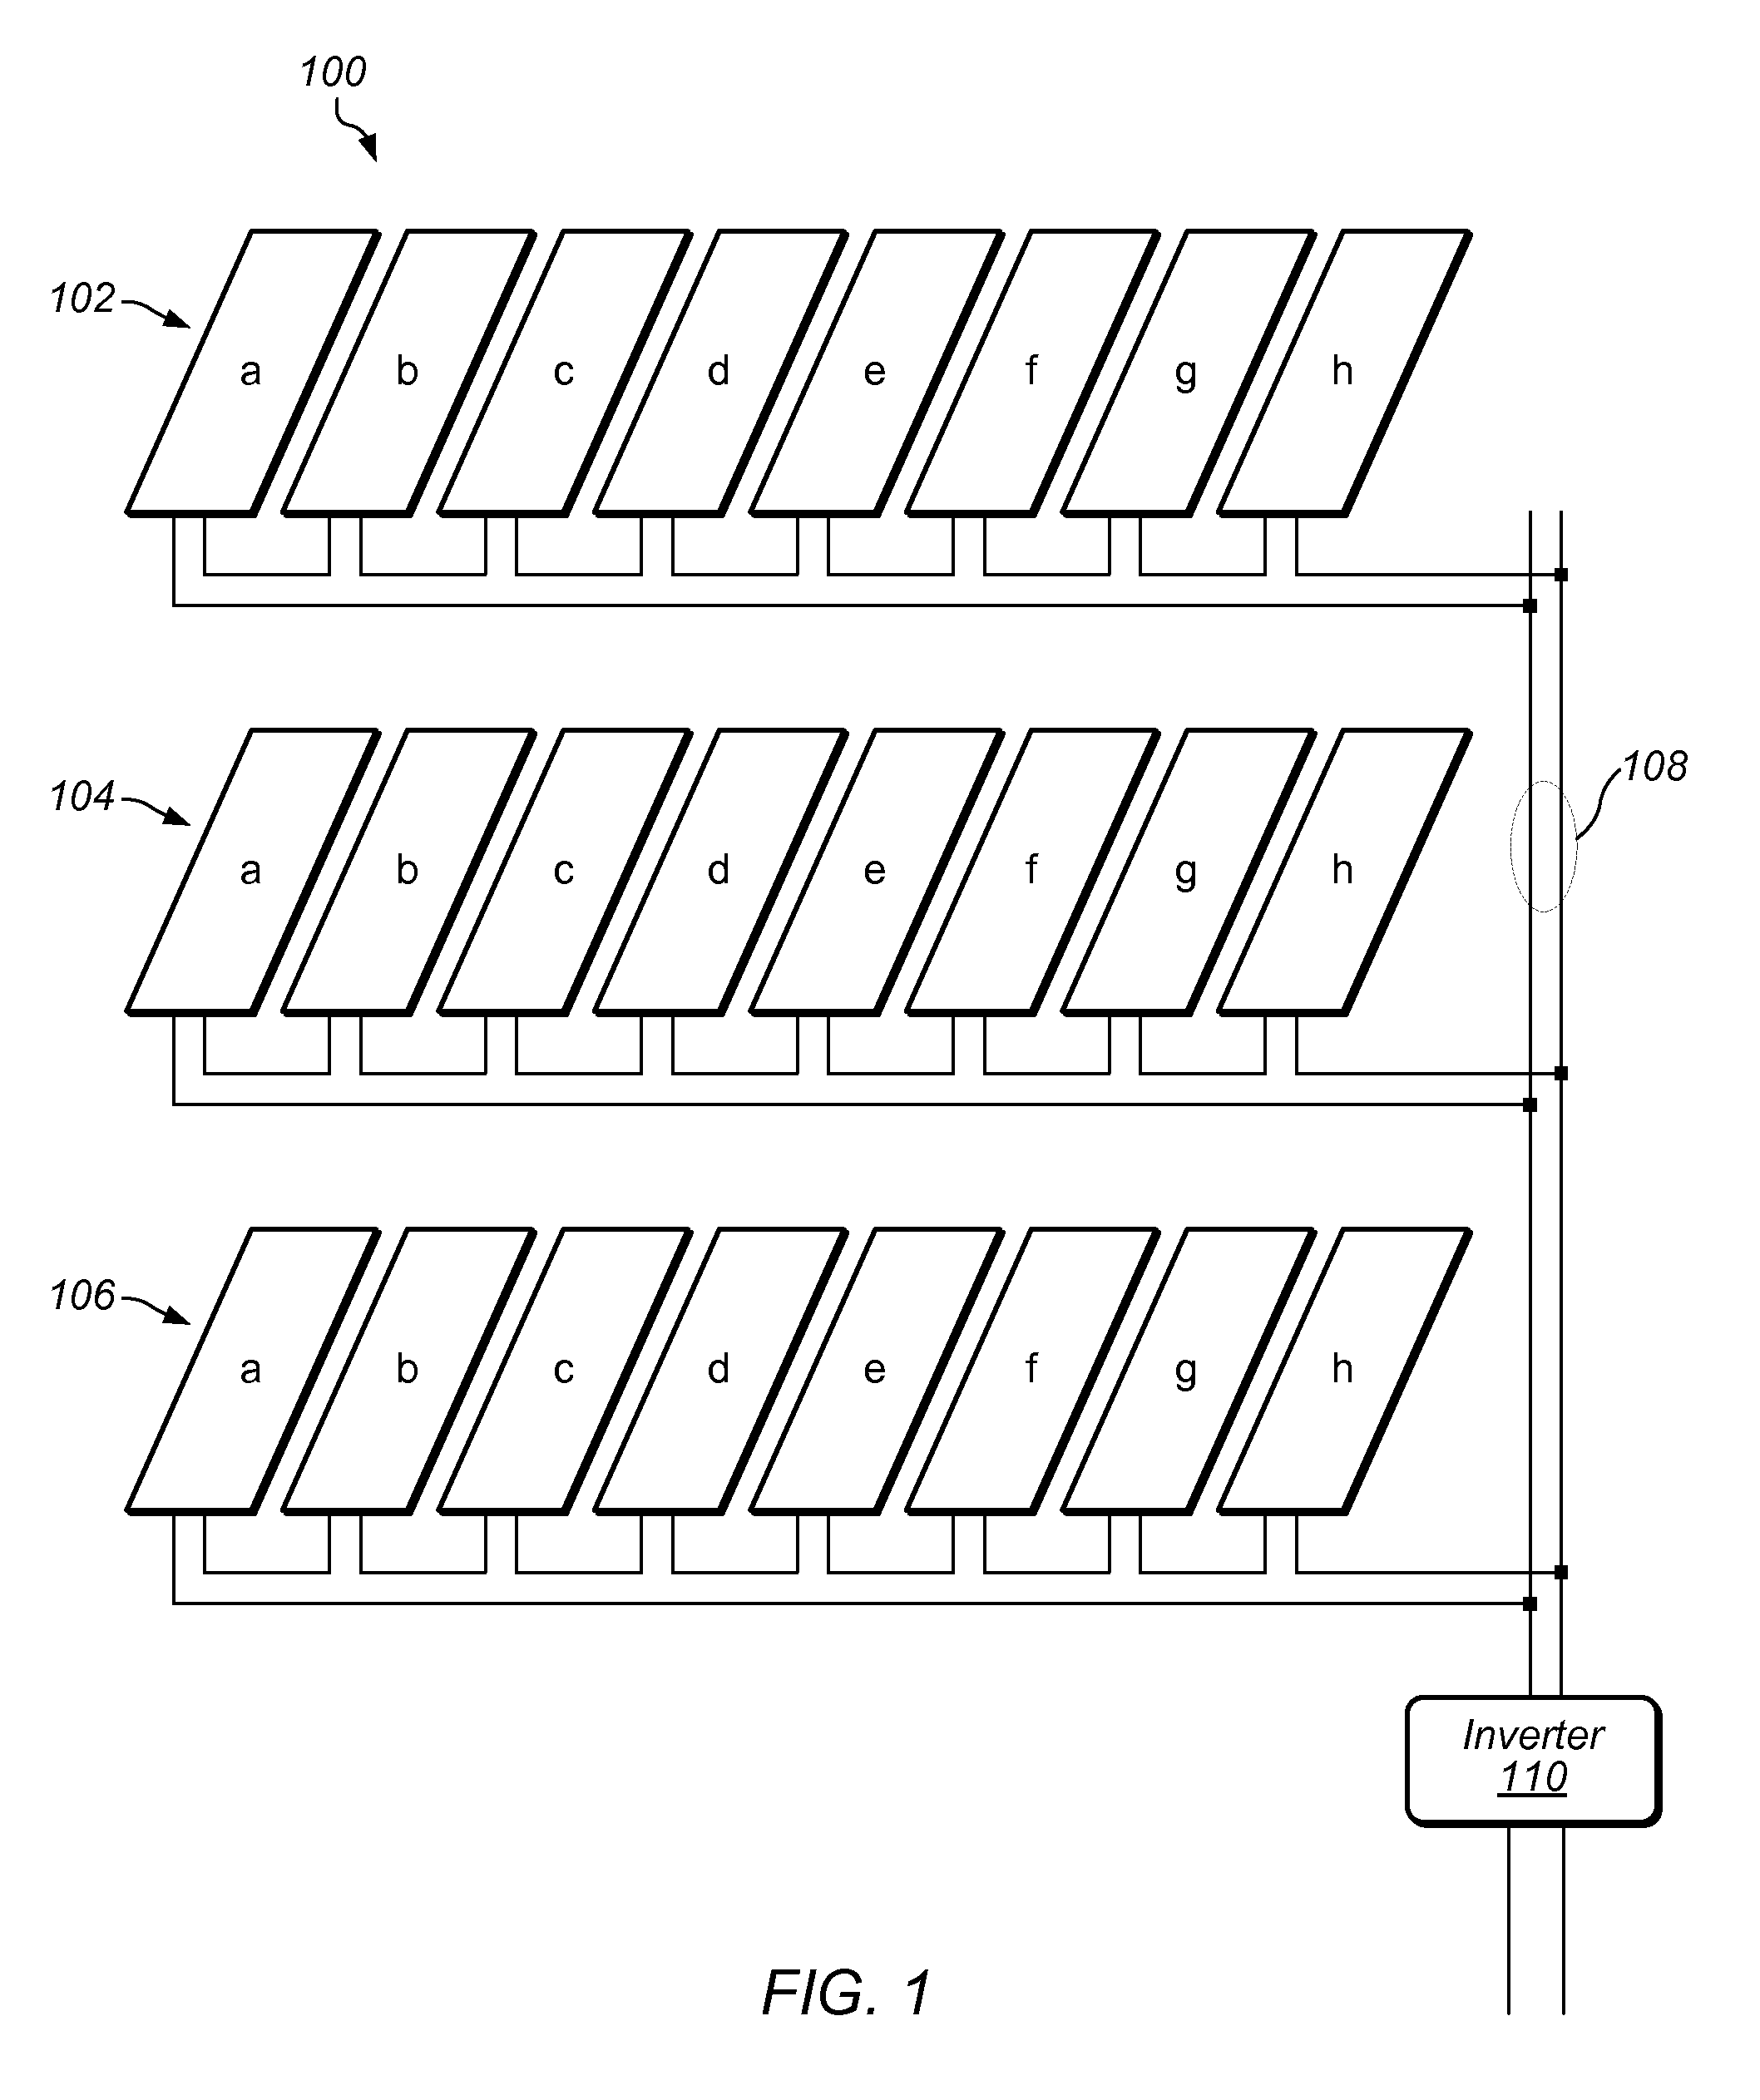 Constraint weighted regulation of DC/DC converters